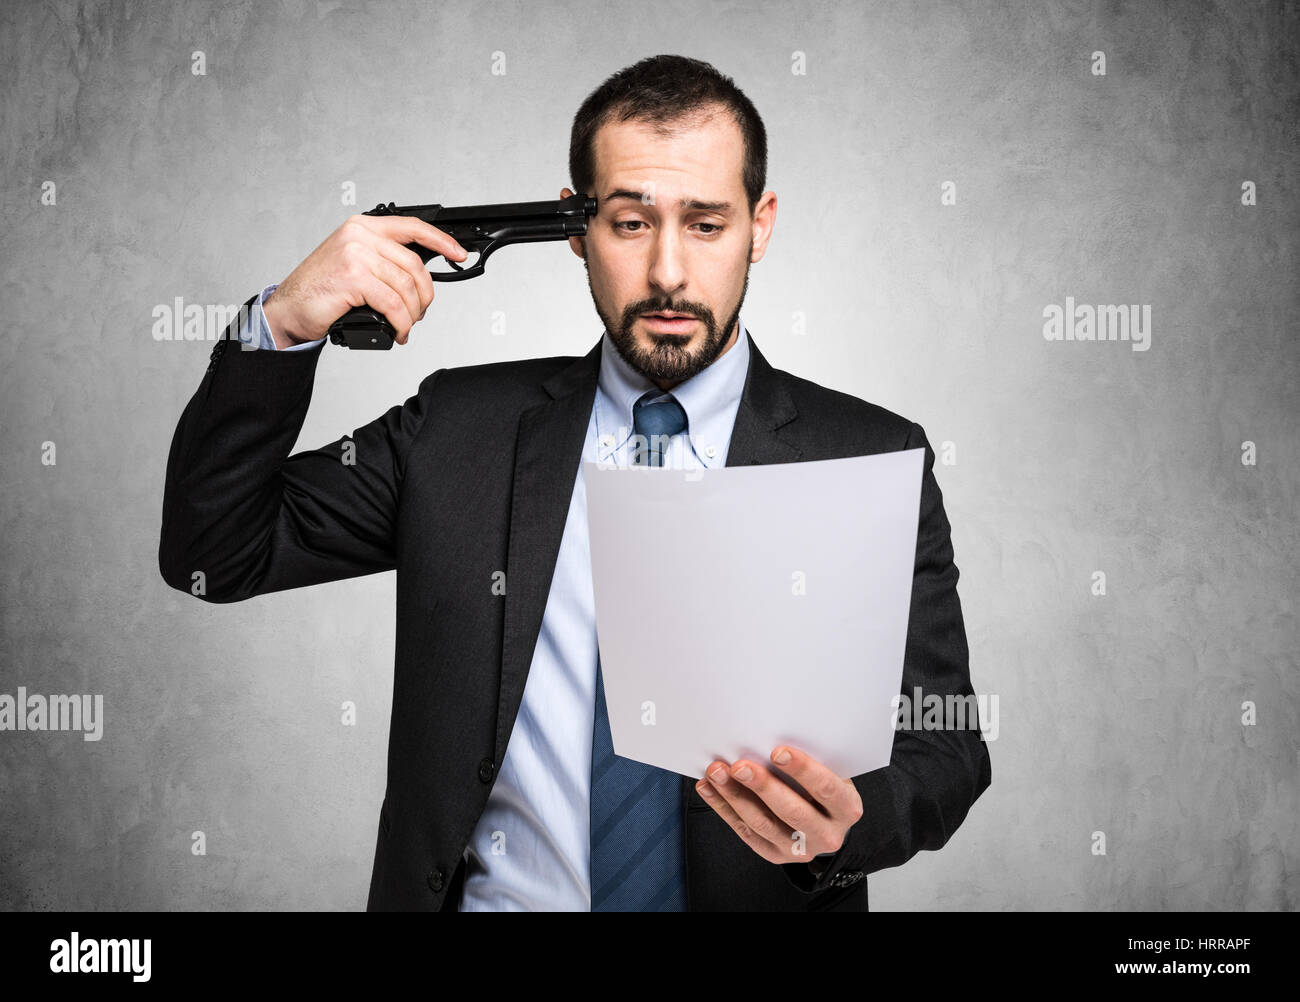 Businessman poining a gun to his head while reading bad news Stock Photo